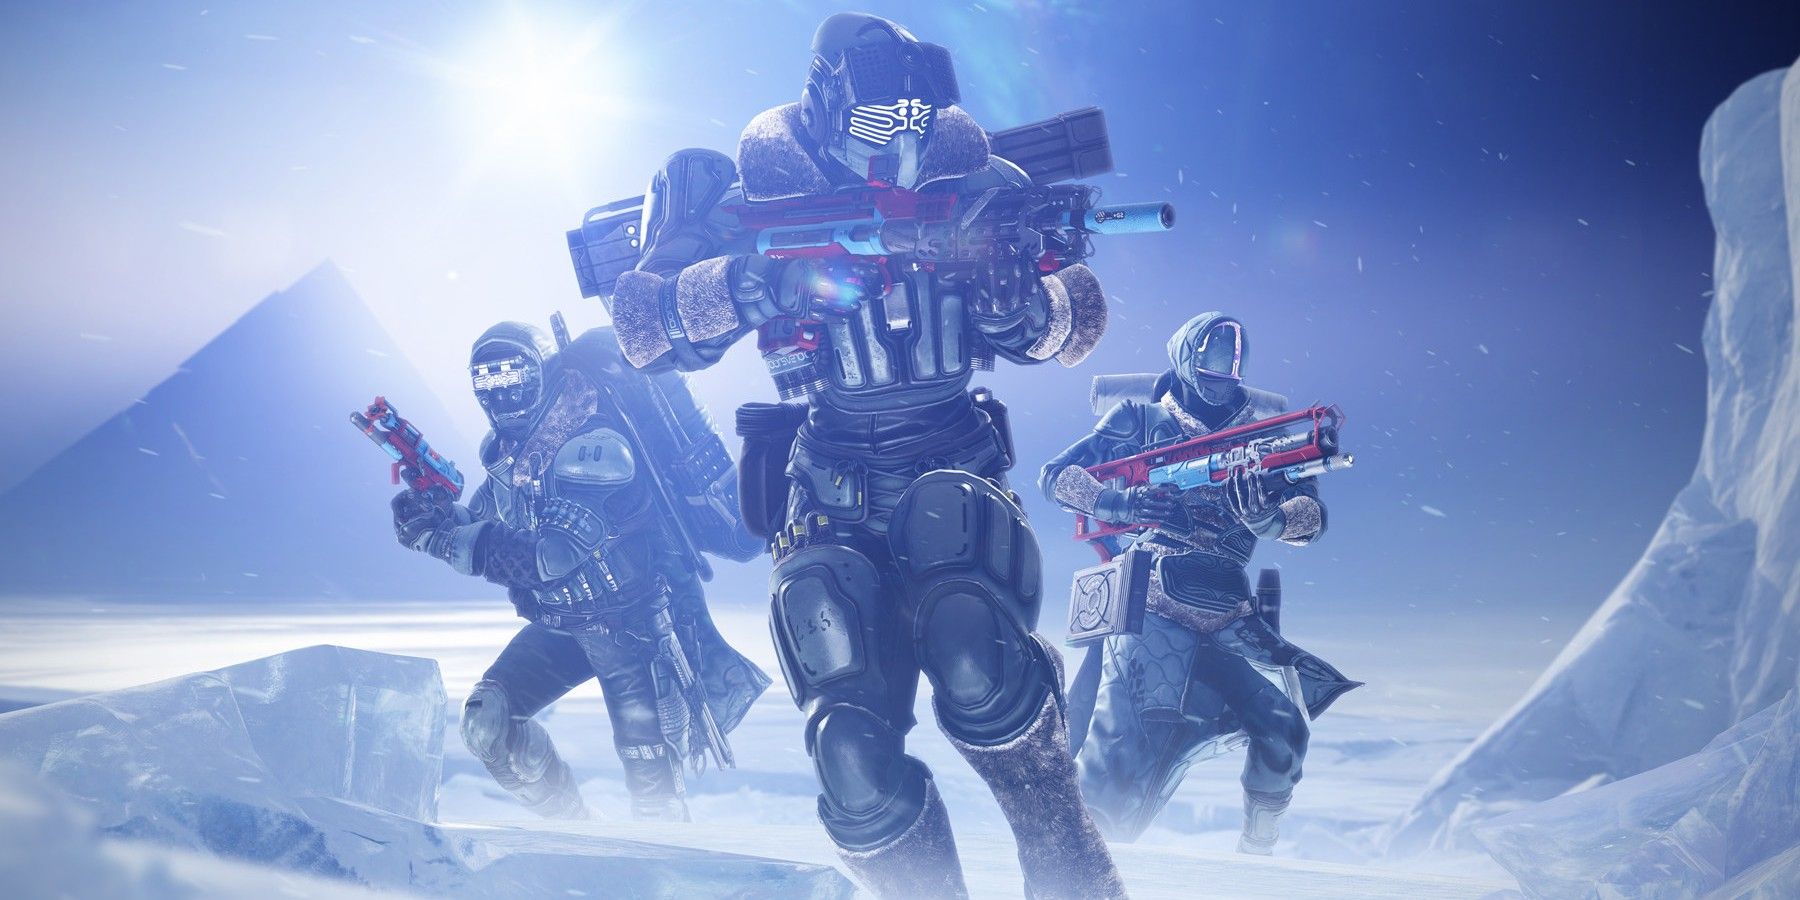 Twitch Prime is giving away Destiny 2 Exotic gear